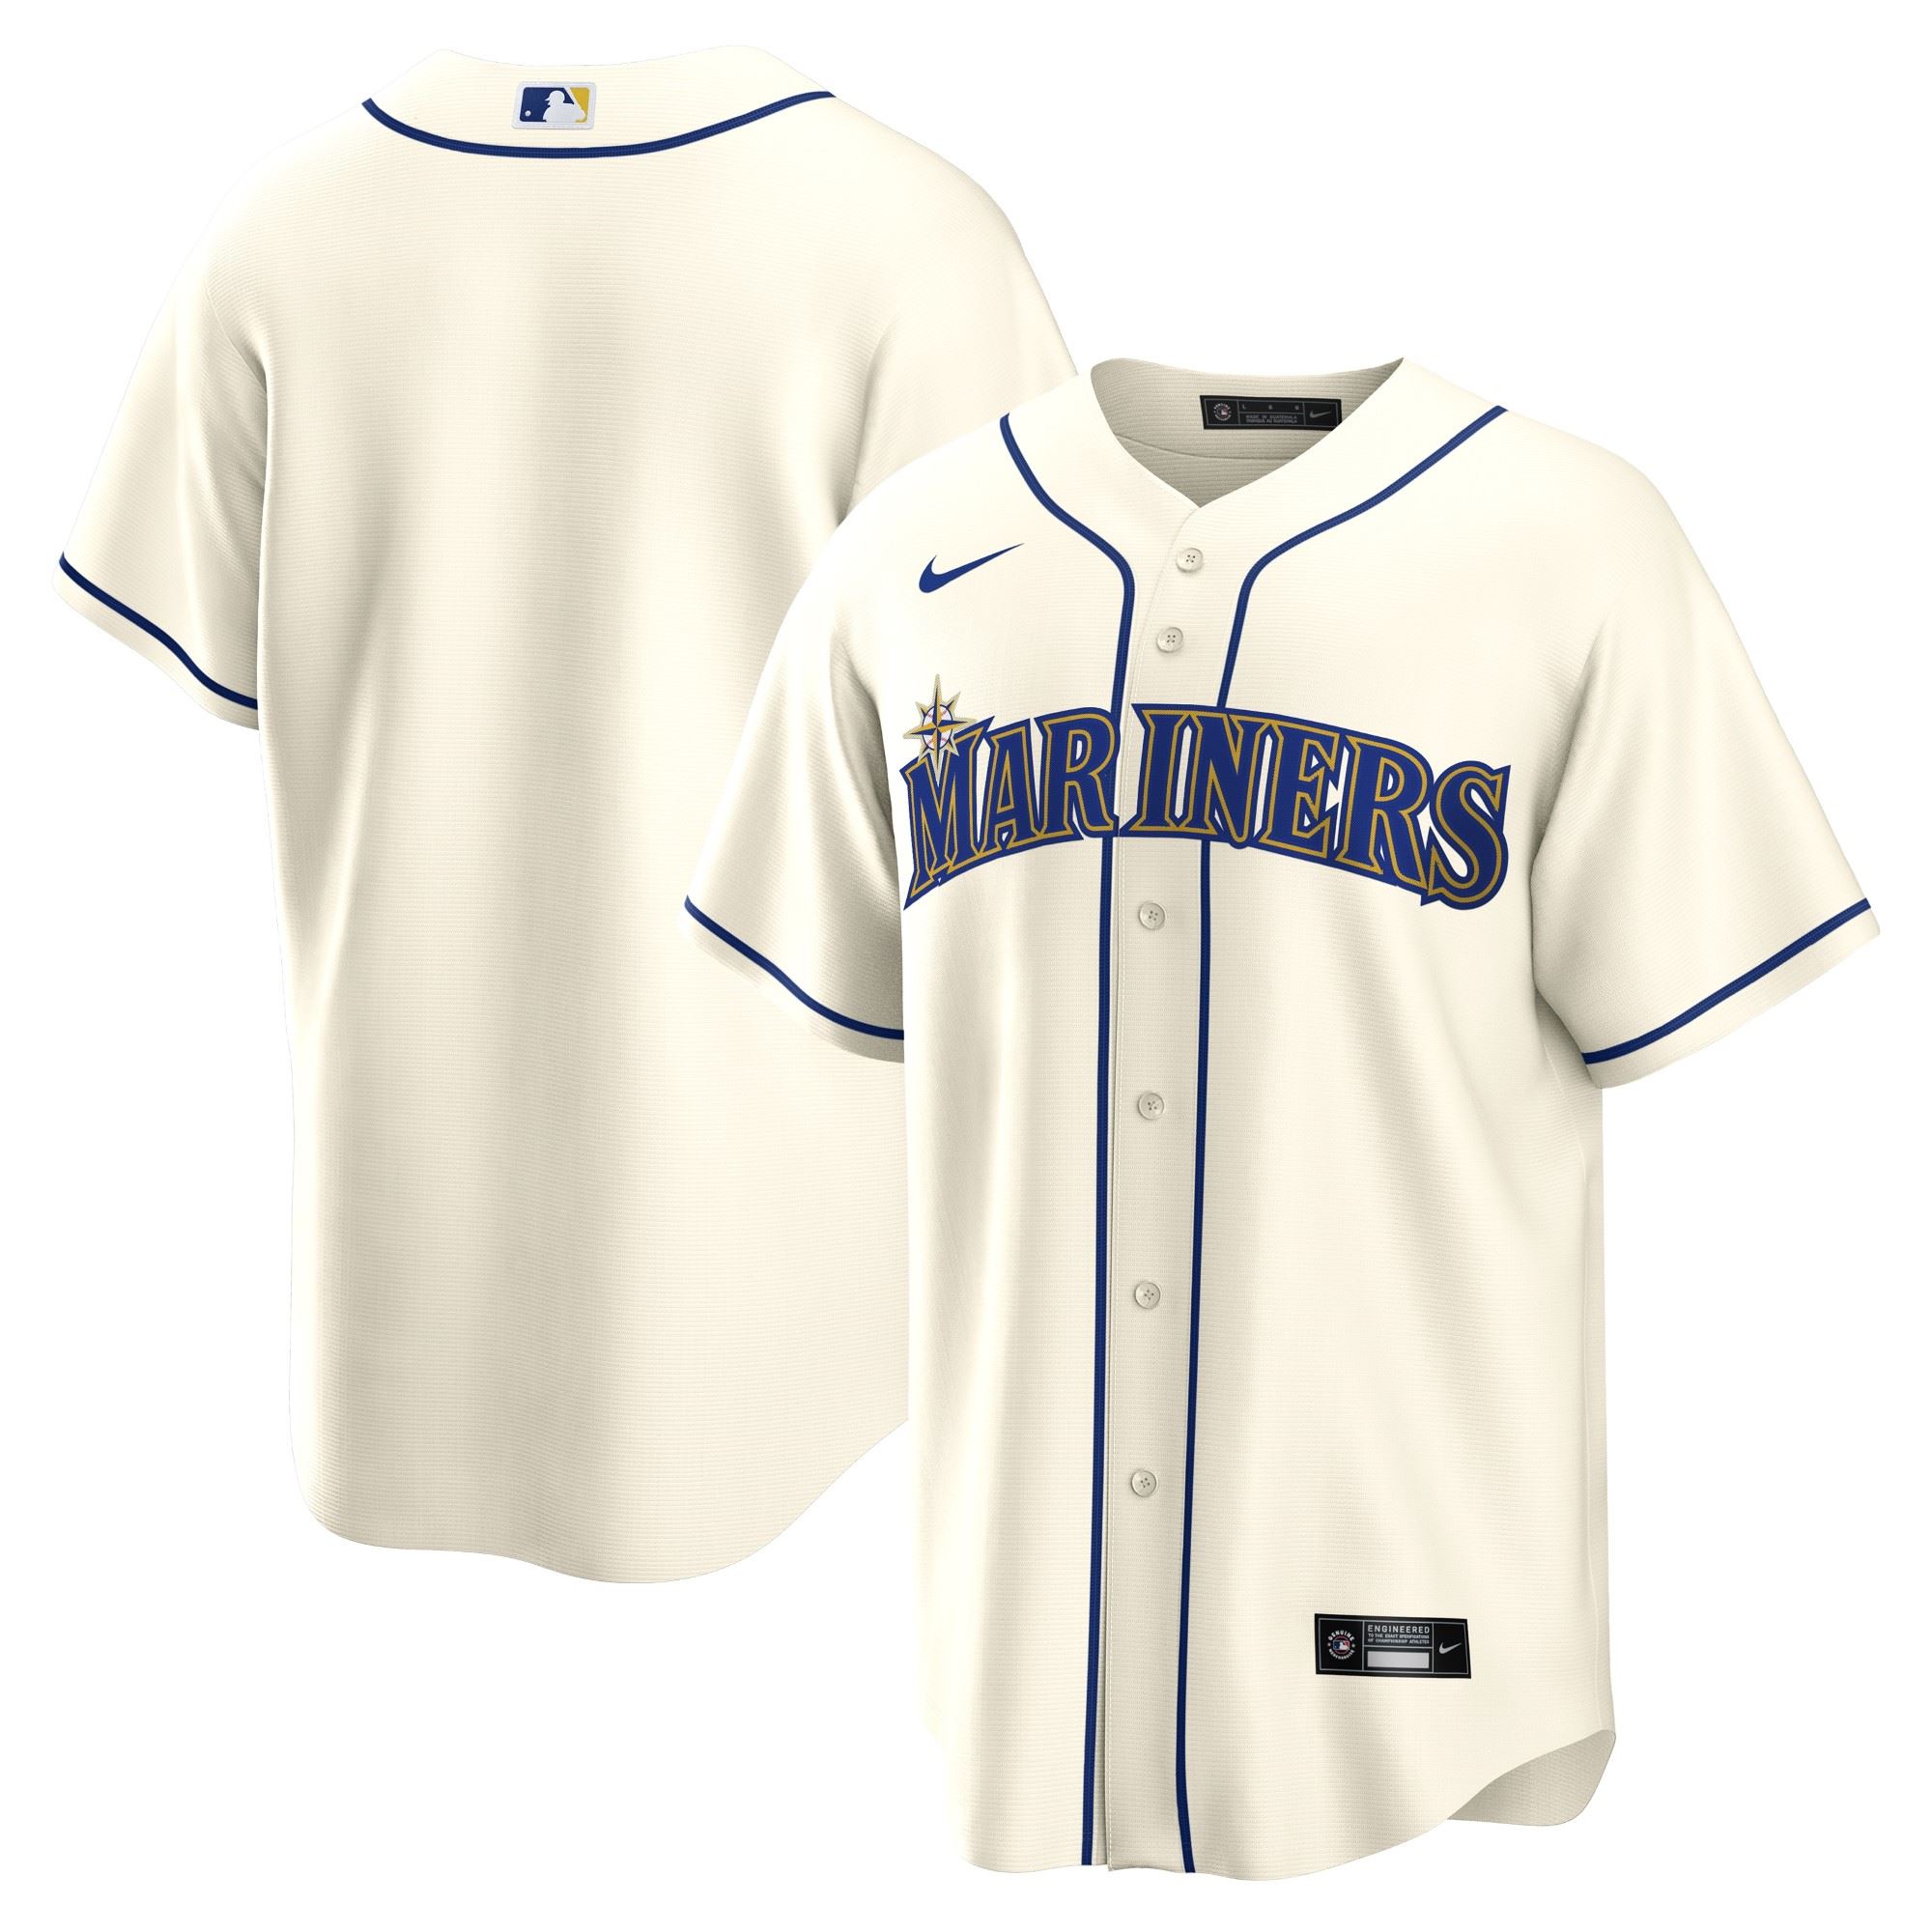 Seattle Mariners Off-White Official MLB Replica Alternate Road Jersey Nike